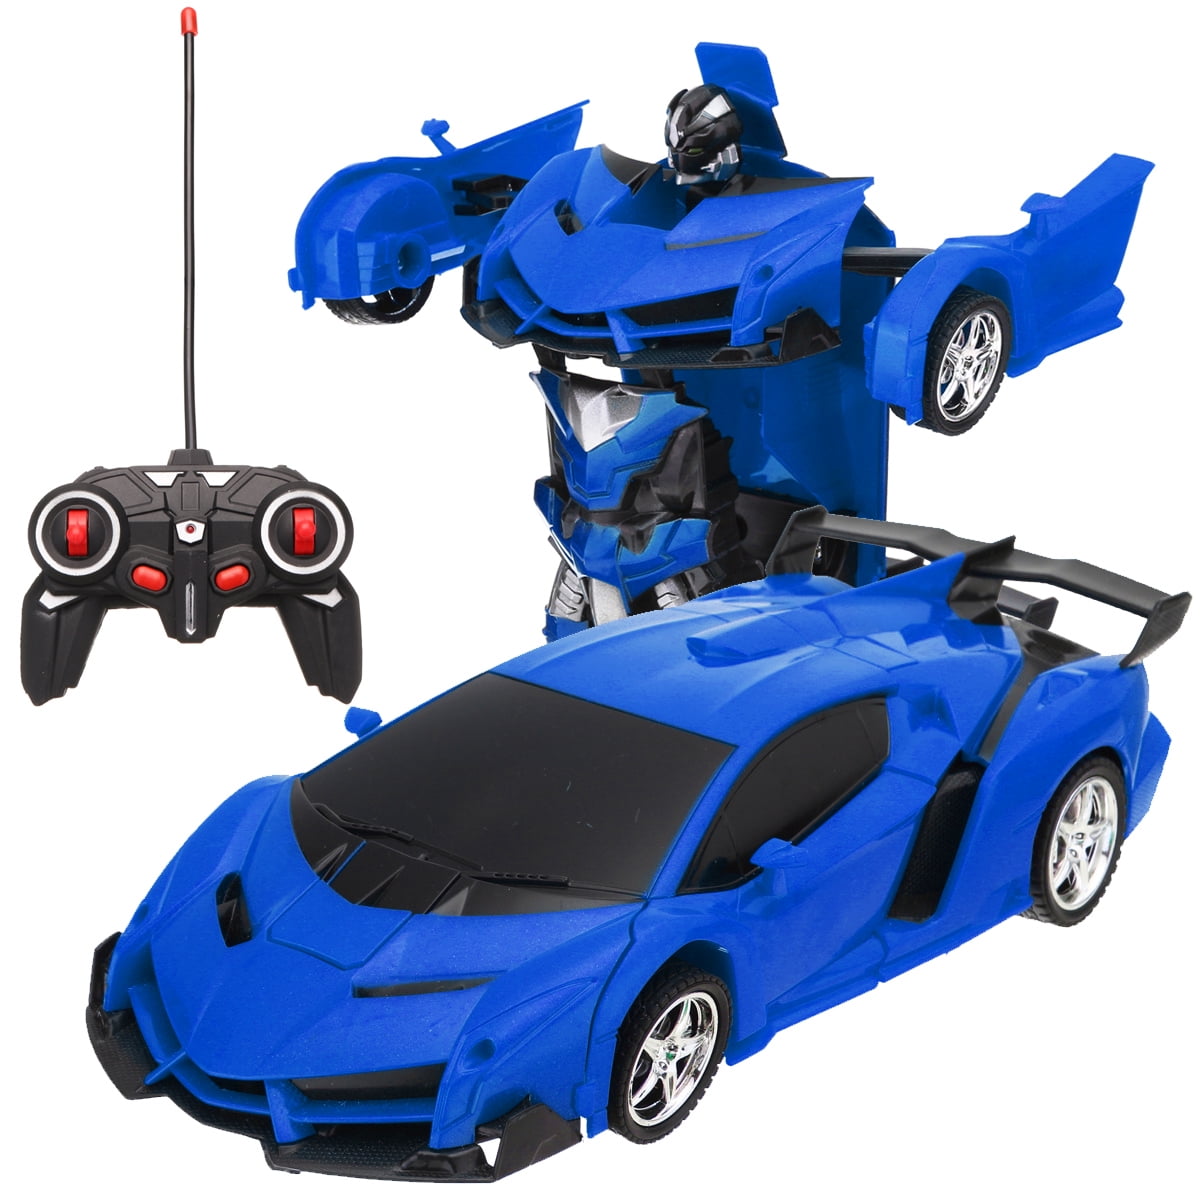 Electronic Remote Control RC Vehicles,Robot Car,RC Car Racing Cars Transformation Car Toy Ultra-Sensing Gesture Control Car Model Kids Toy Finetoknow Transformation Car Robot